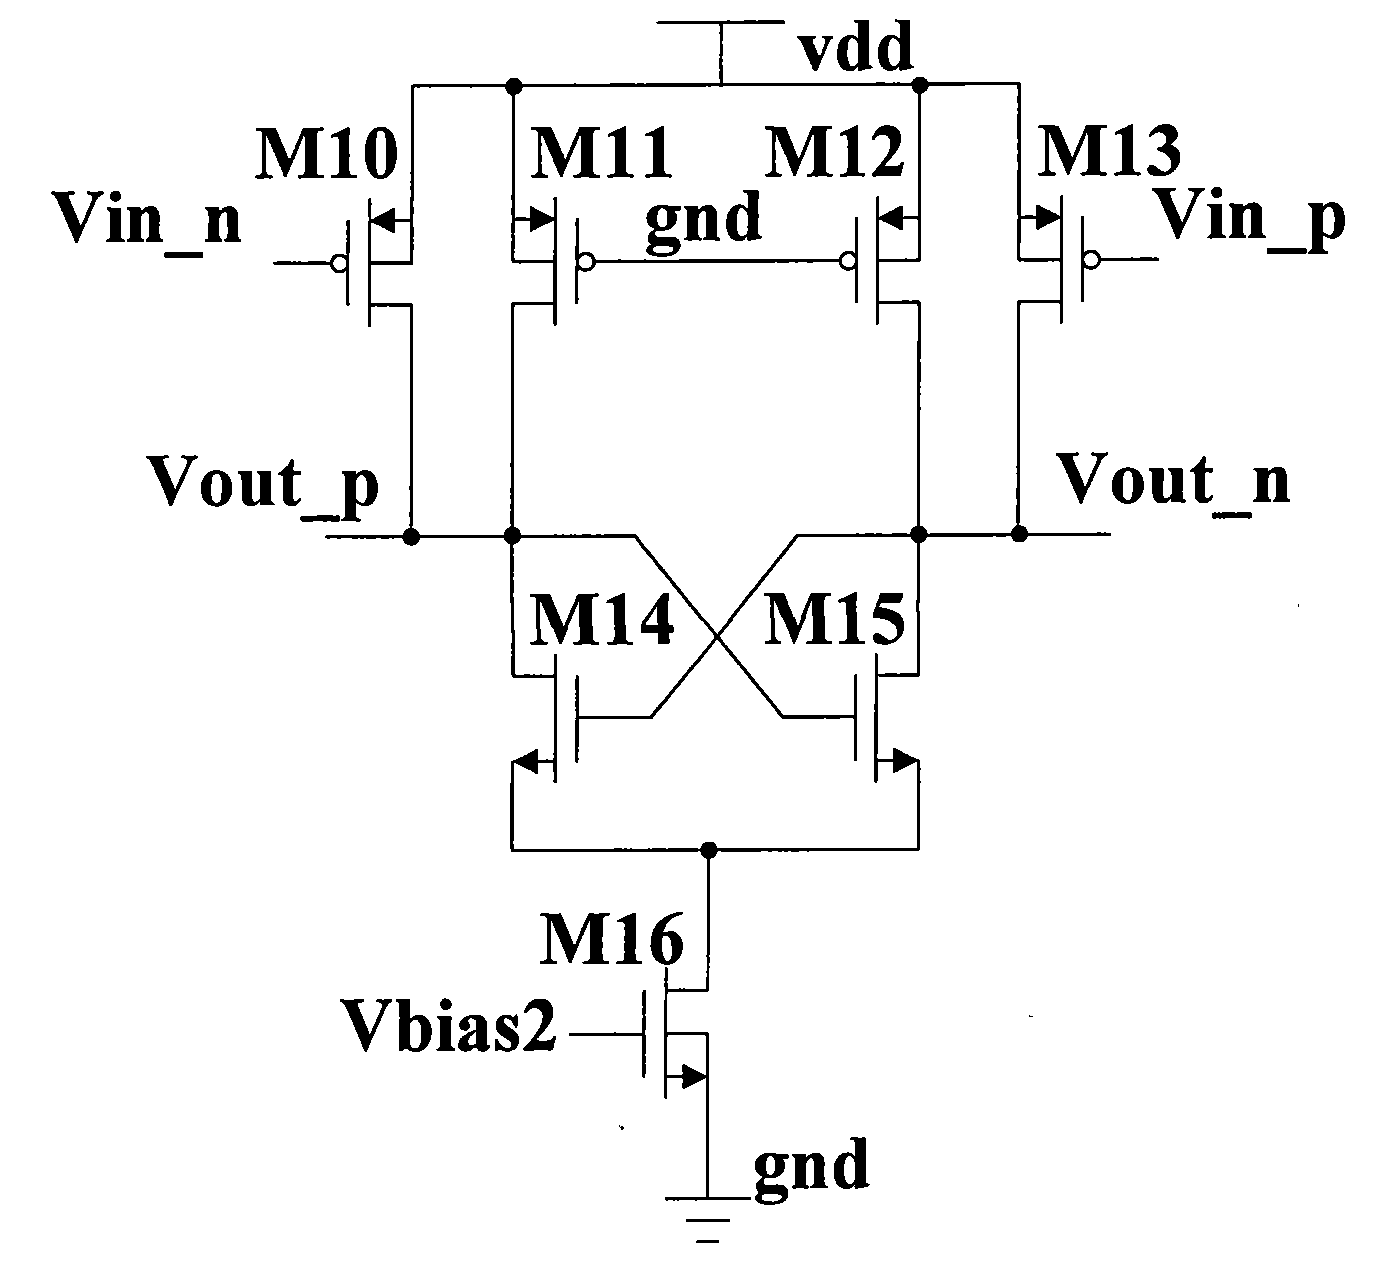 High-speed current switch driver based on MOS current-mode logic